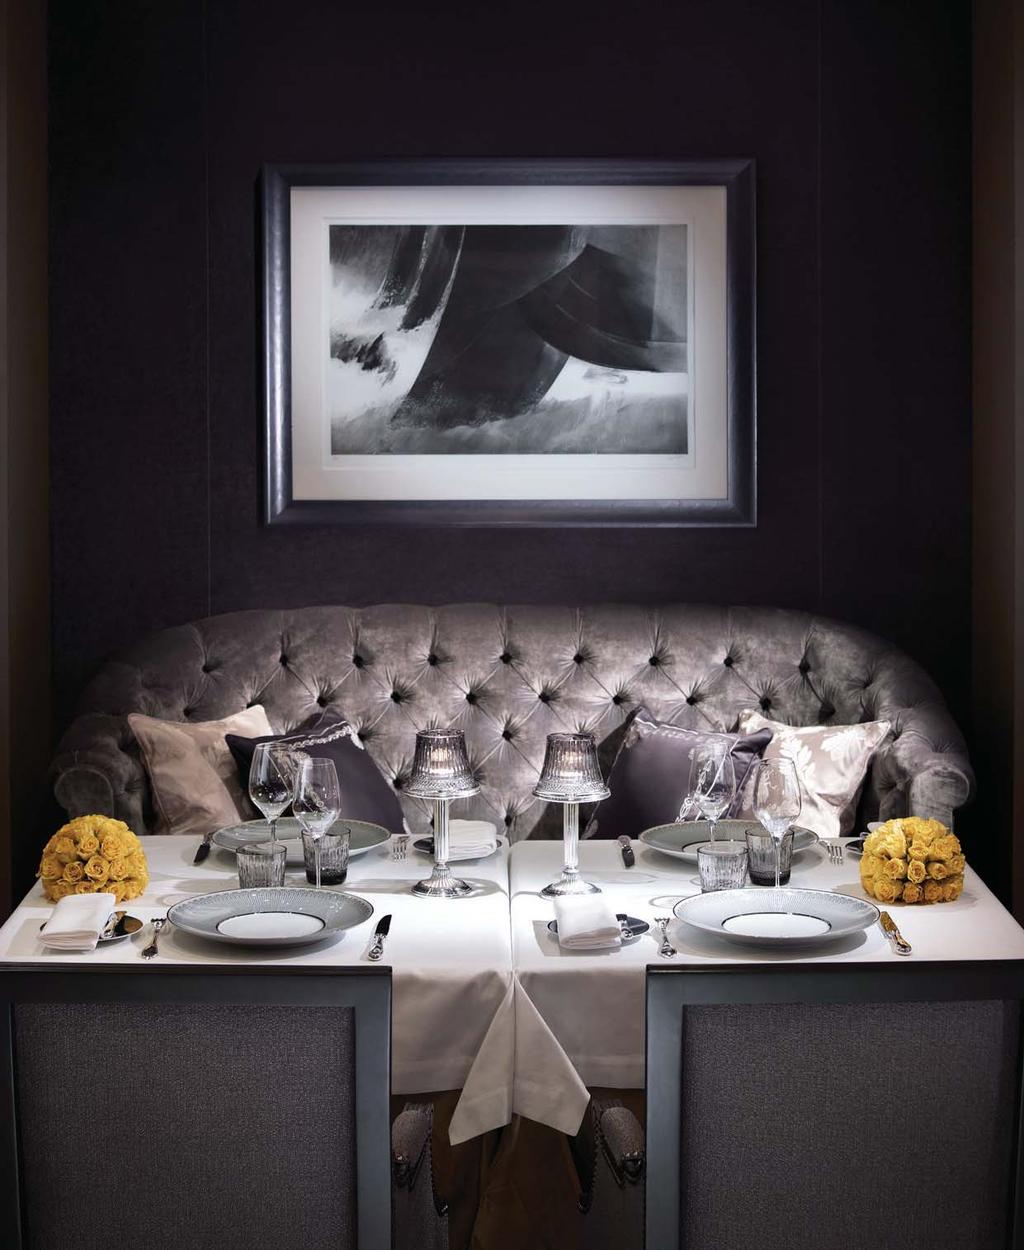 leaving a panorama of glittering stars outside, we stepped into L Abeille restaurant where a flurry of silver, grey and taupe tones greeted us politely.